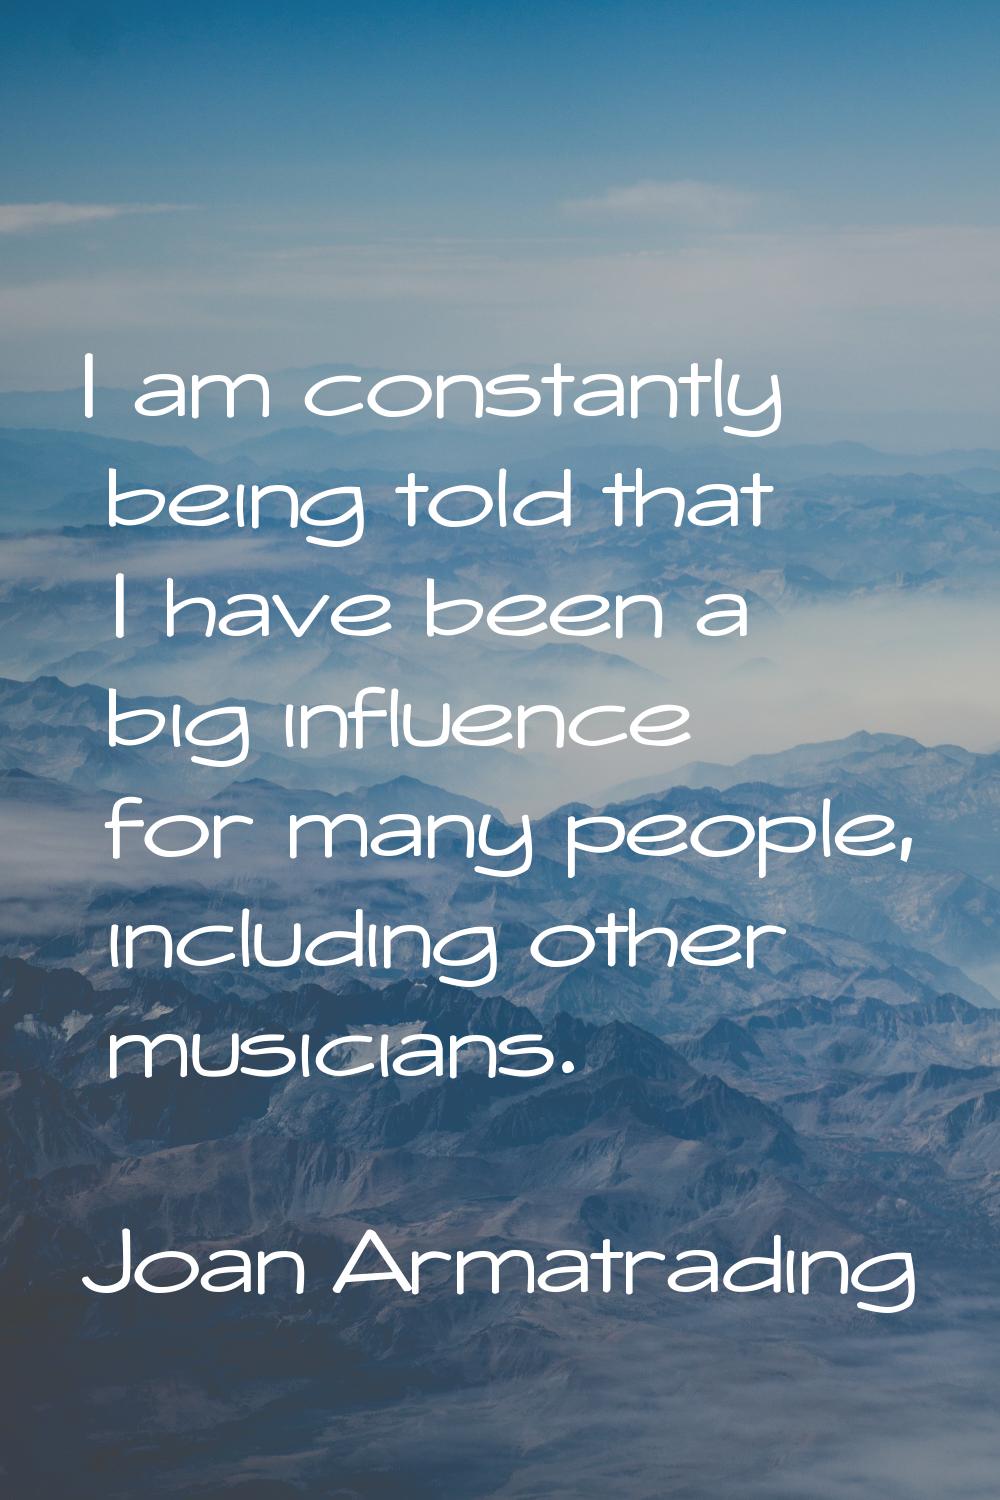 I am constantly being told that I have been a big influence for many people, including other musici